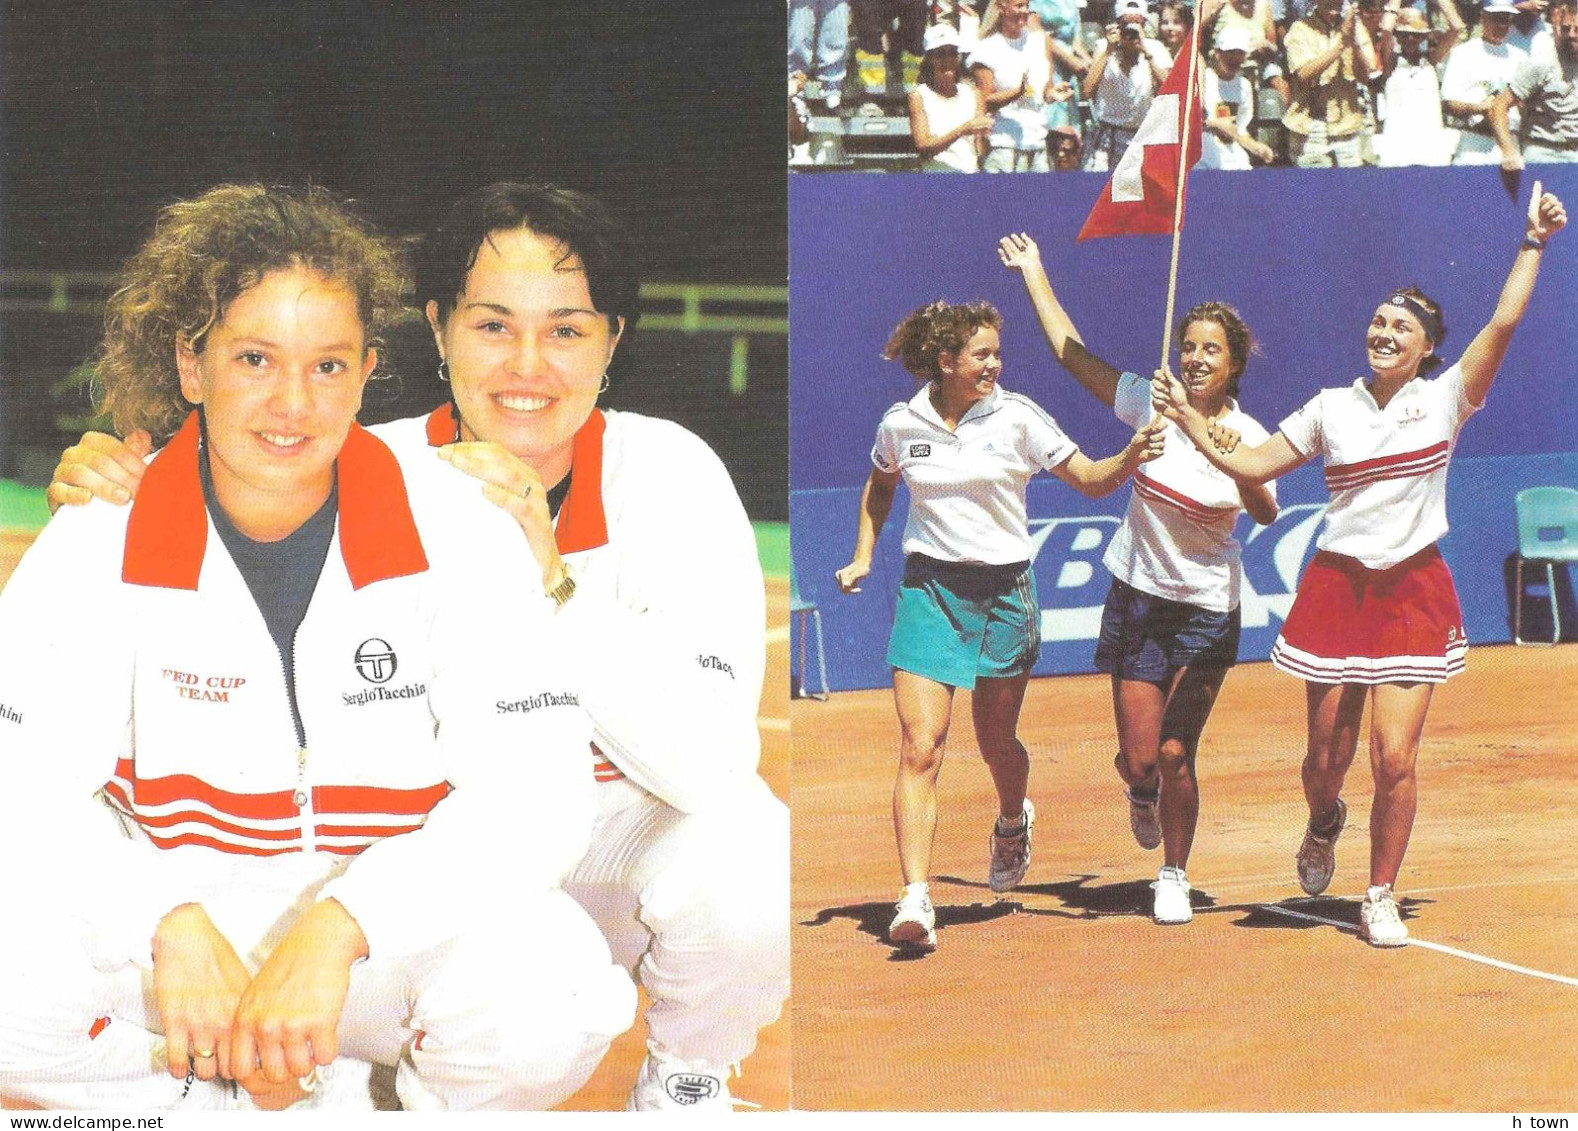 820  Jeux Olympiques Torino: Sion, Ville Candidate - 2006 Winter Olympics Candidate: Sion, Switzerland. Tennis Fed Cup - Invierno 2006: Turín